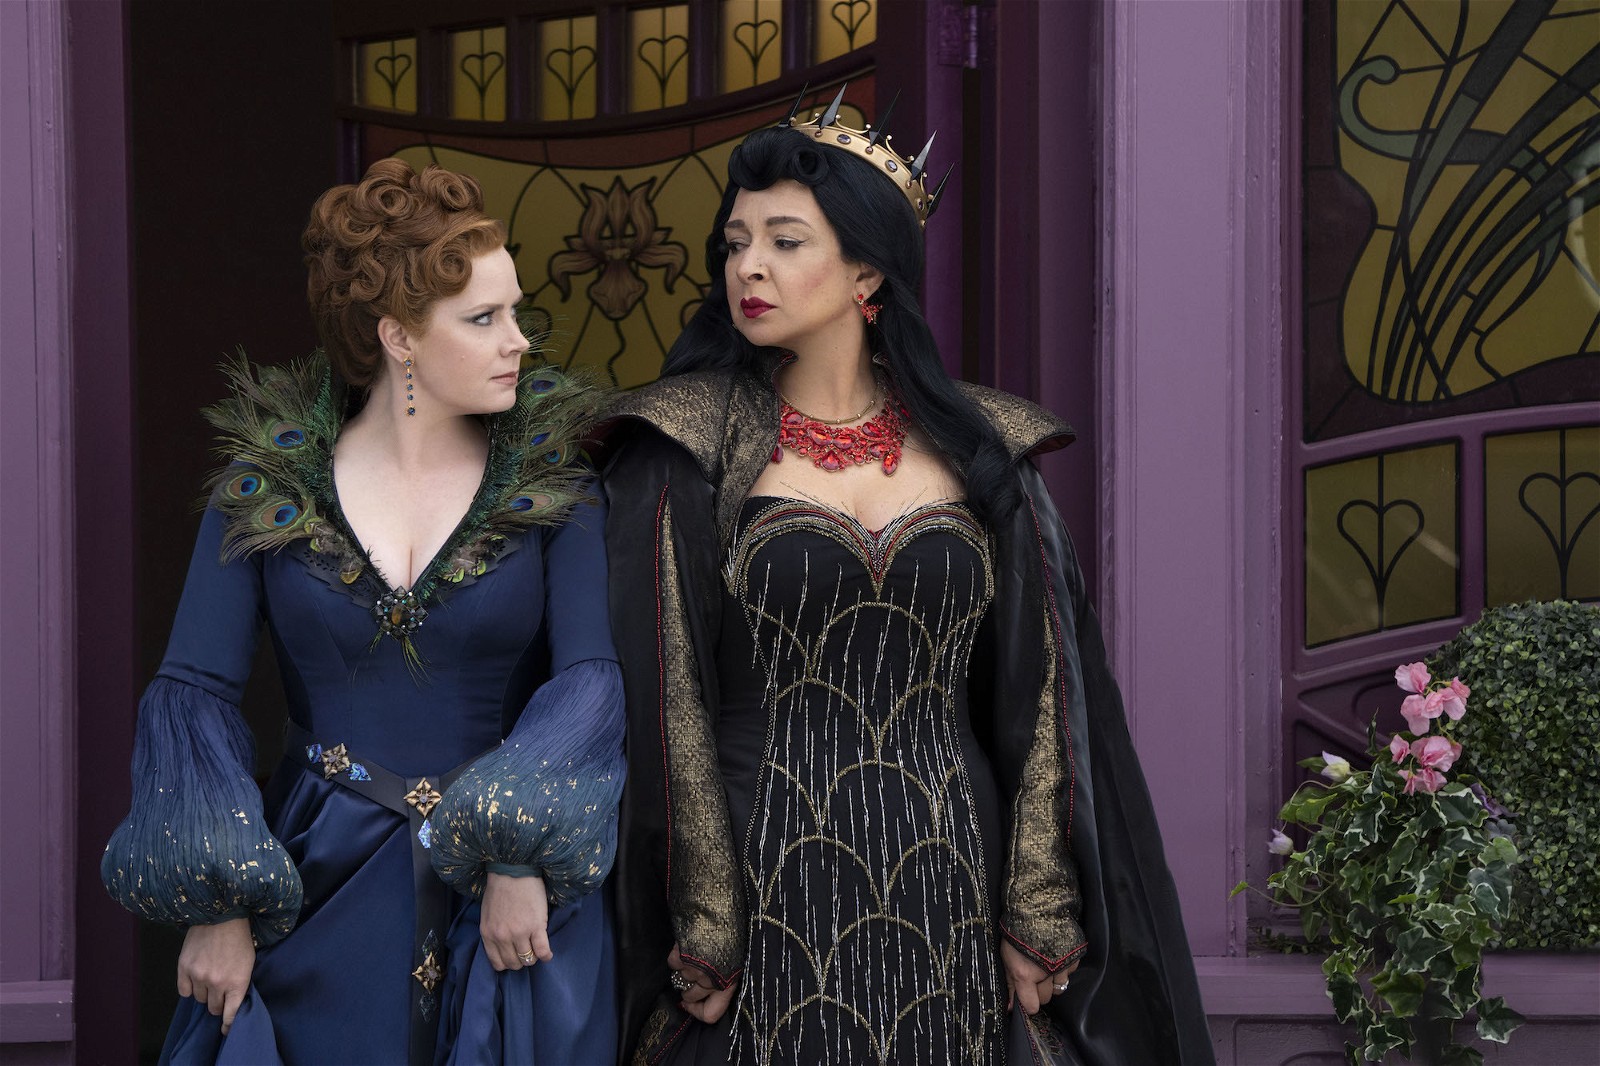 (L-R): Amy Adams as Giselle and Maya Rudolph as Malvina Monroe in Disney's live-action DISENCHANTED, exclusively on Disney+. Photo by Jonathan Hession. © 2022 Disney Enterprises, Inc. All Rights Reserved.